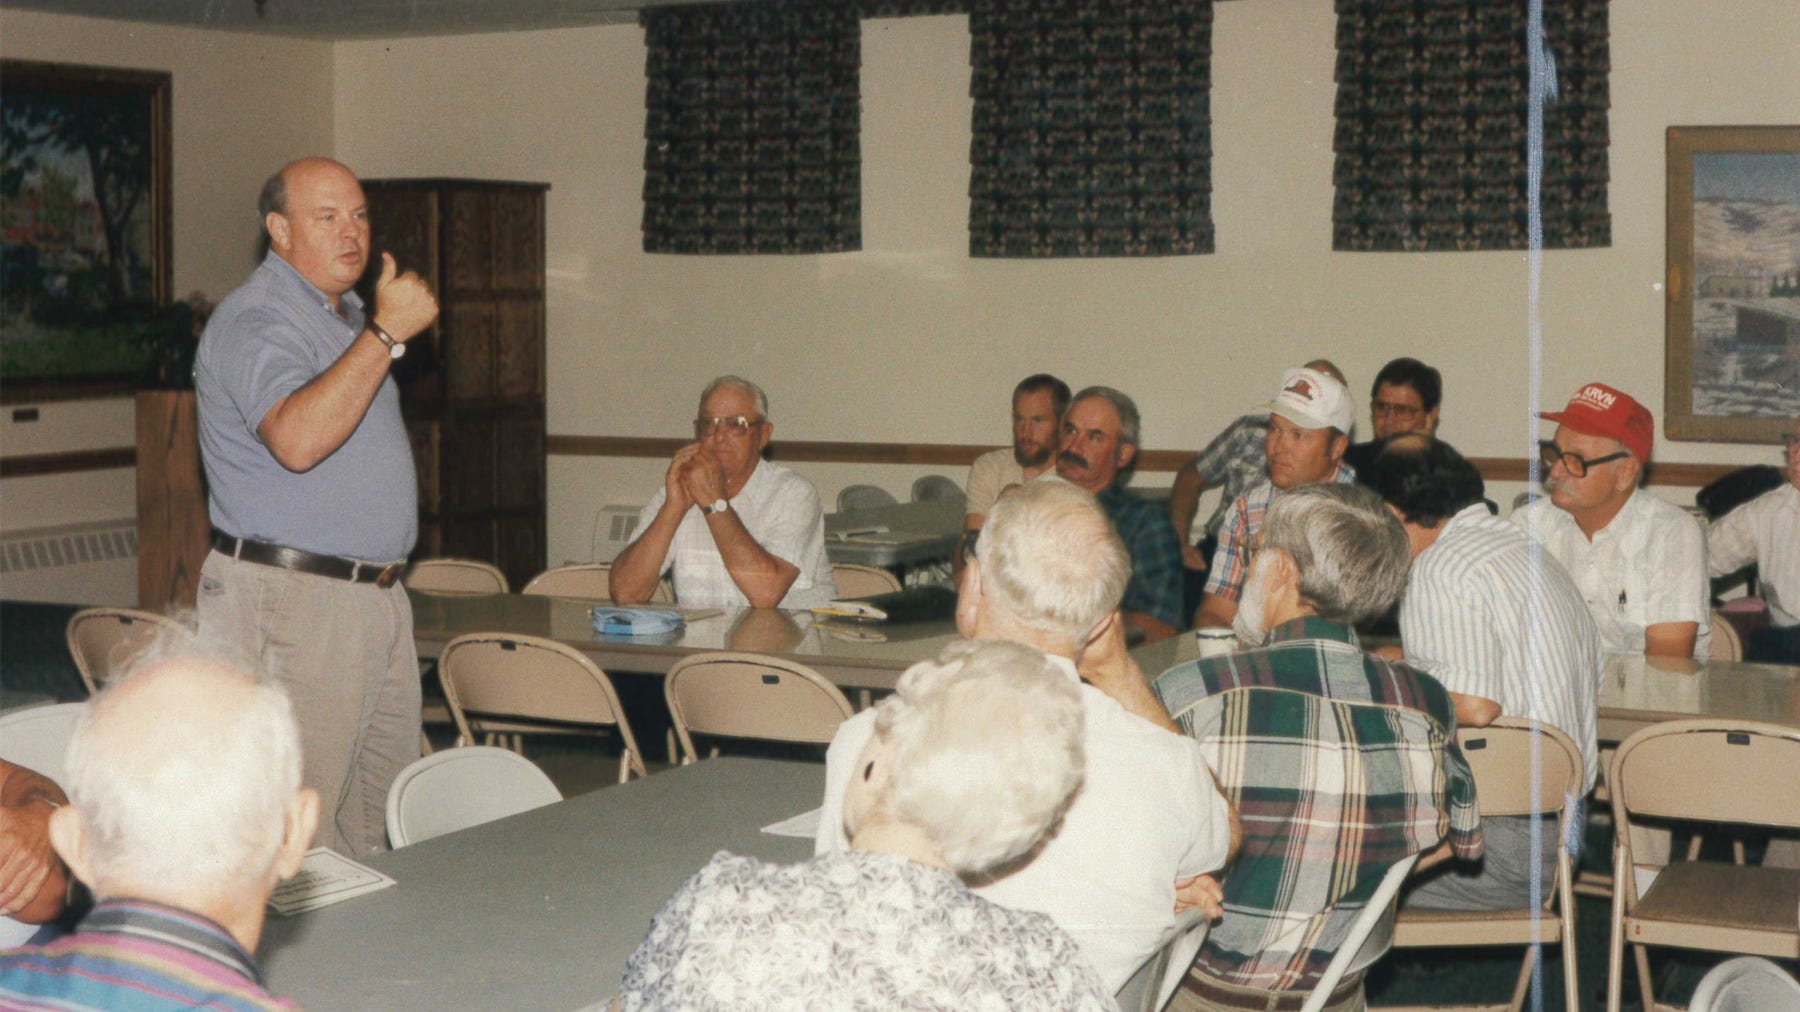 Marty Strange, speaks to a group of farmers at a meeting some time in the early 1990s